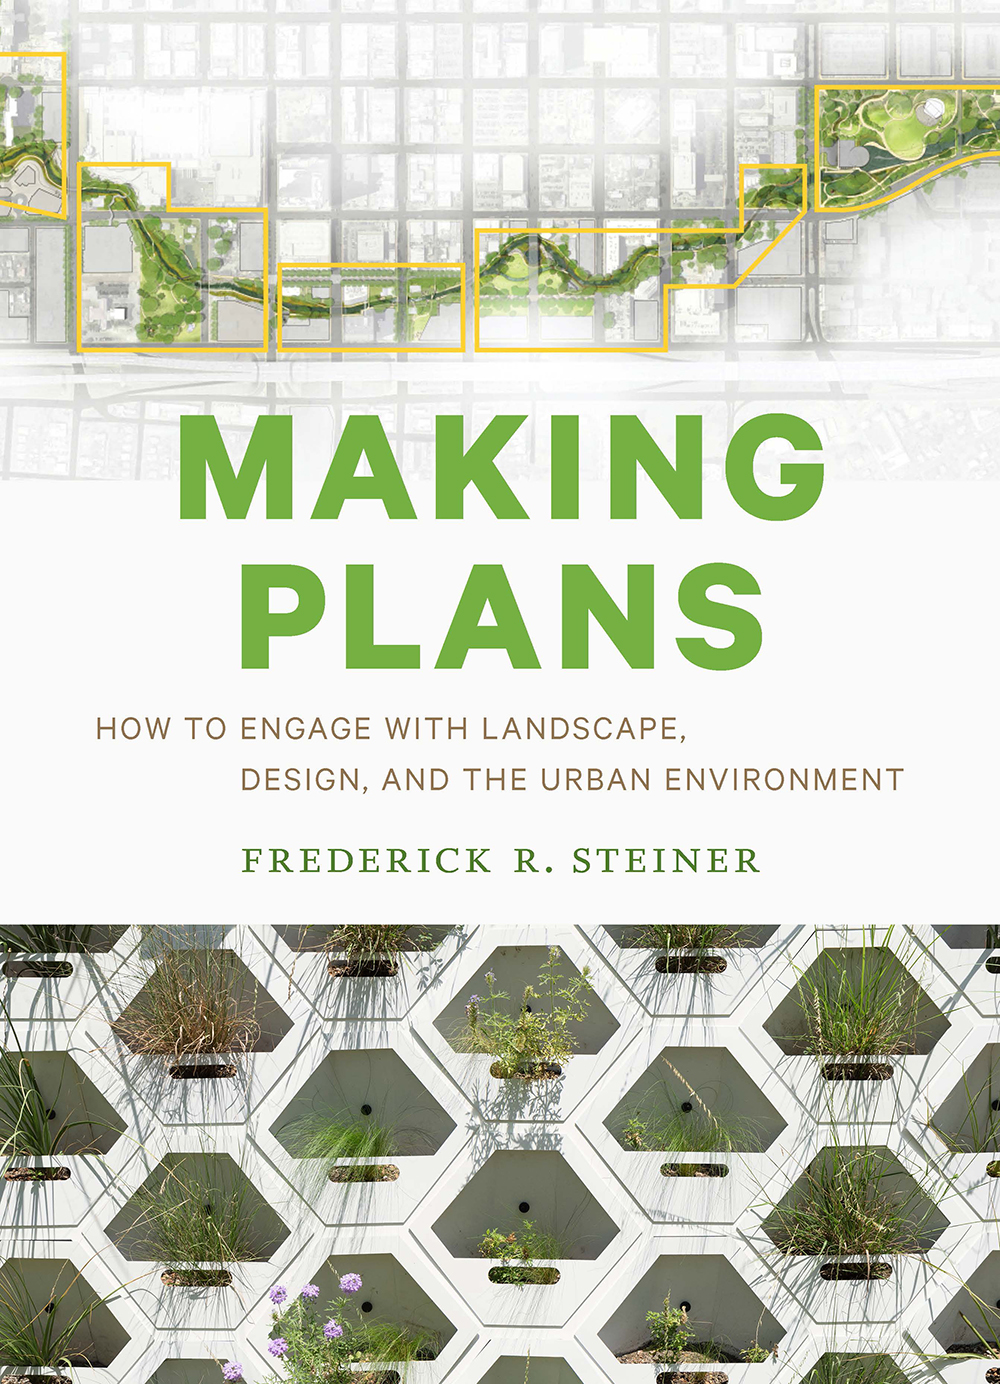 Making Plans. How to Engage With Landscape, Design and the Urban Environment.